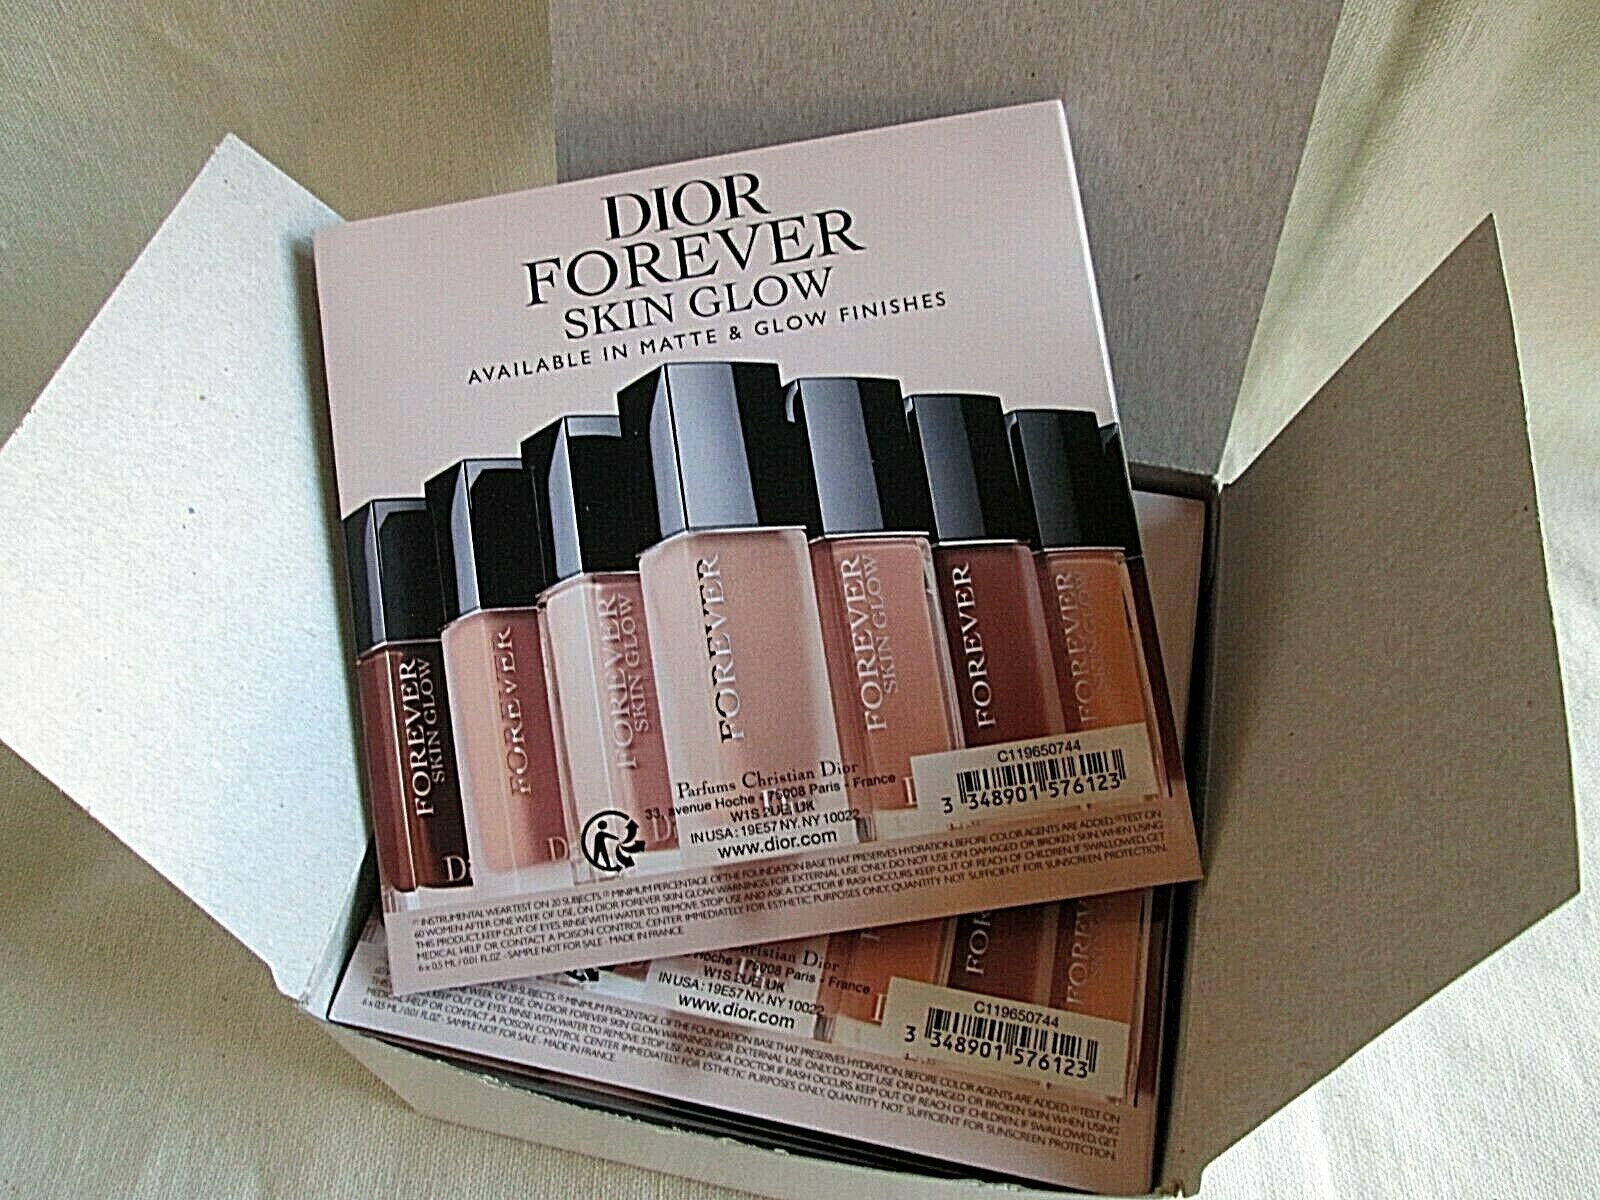 SET OF 10 DIOR FOREVER SKIN GLOW SAMPLE PACKETS 2N 